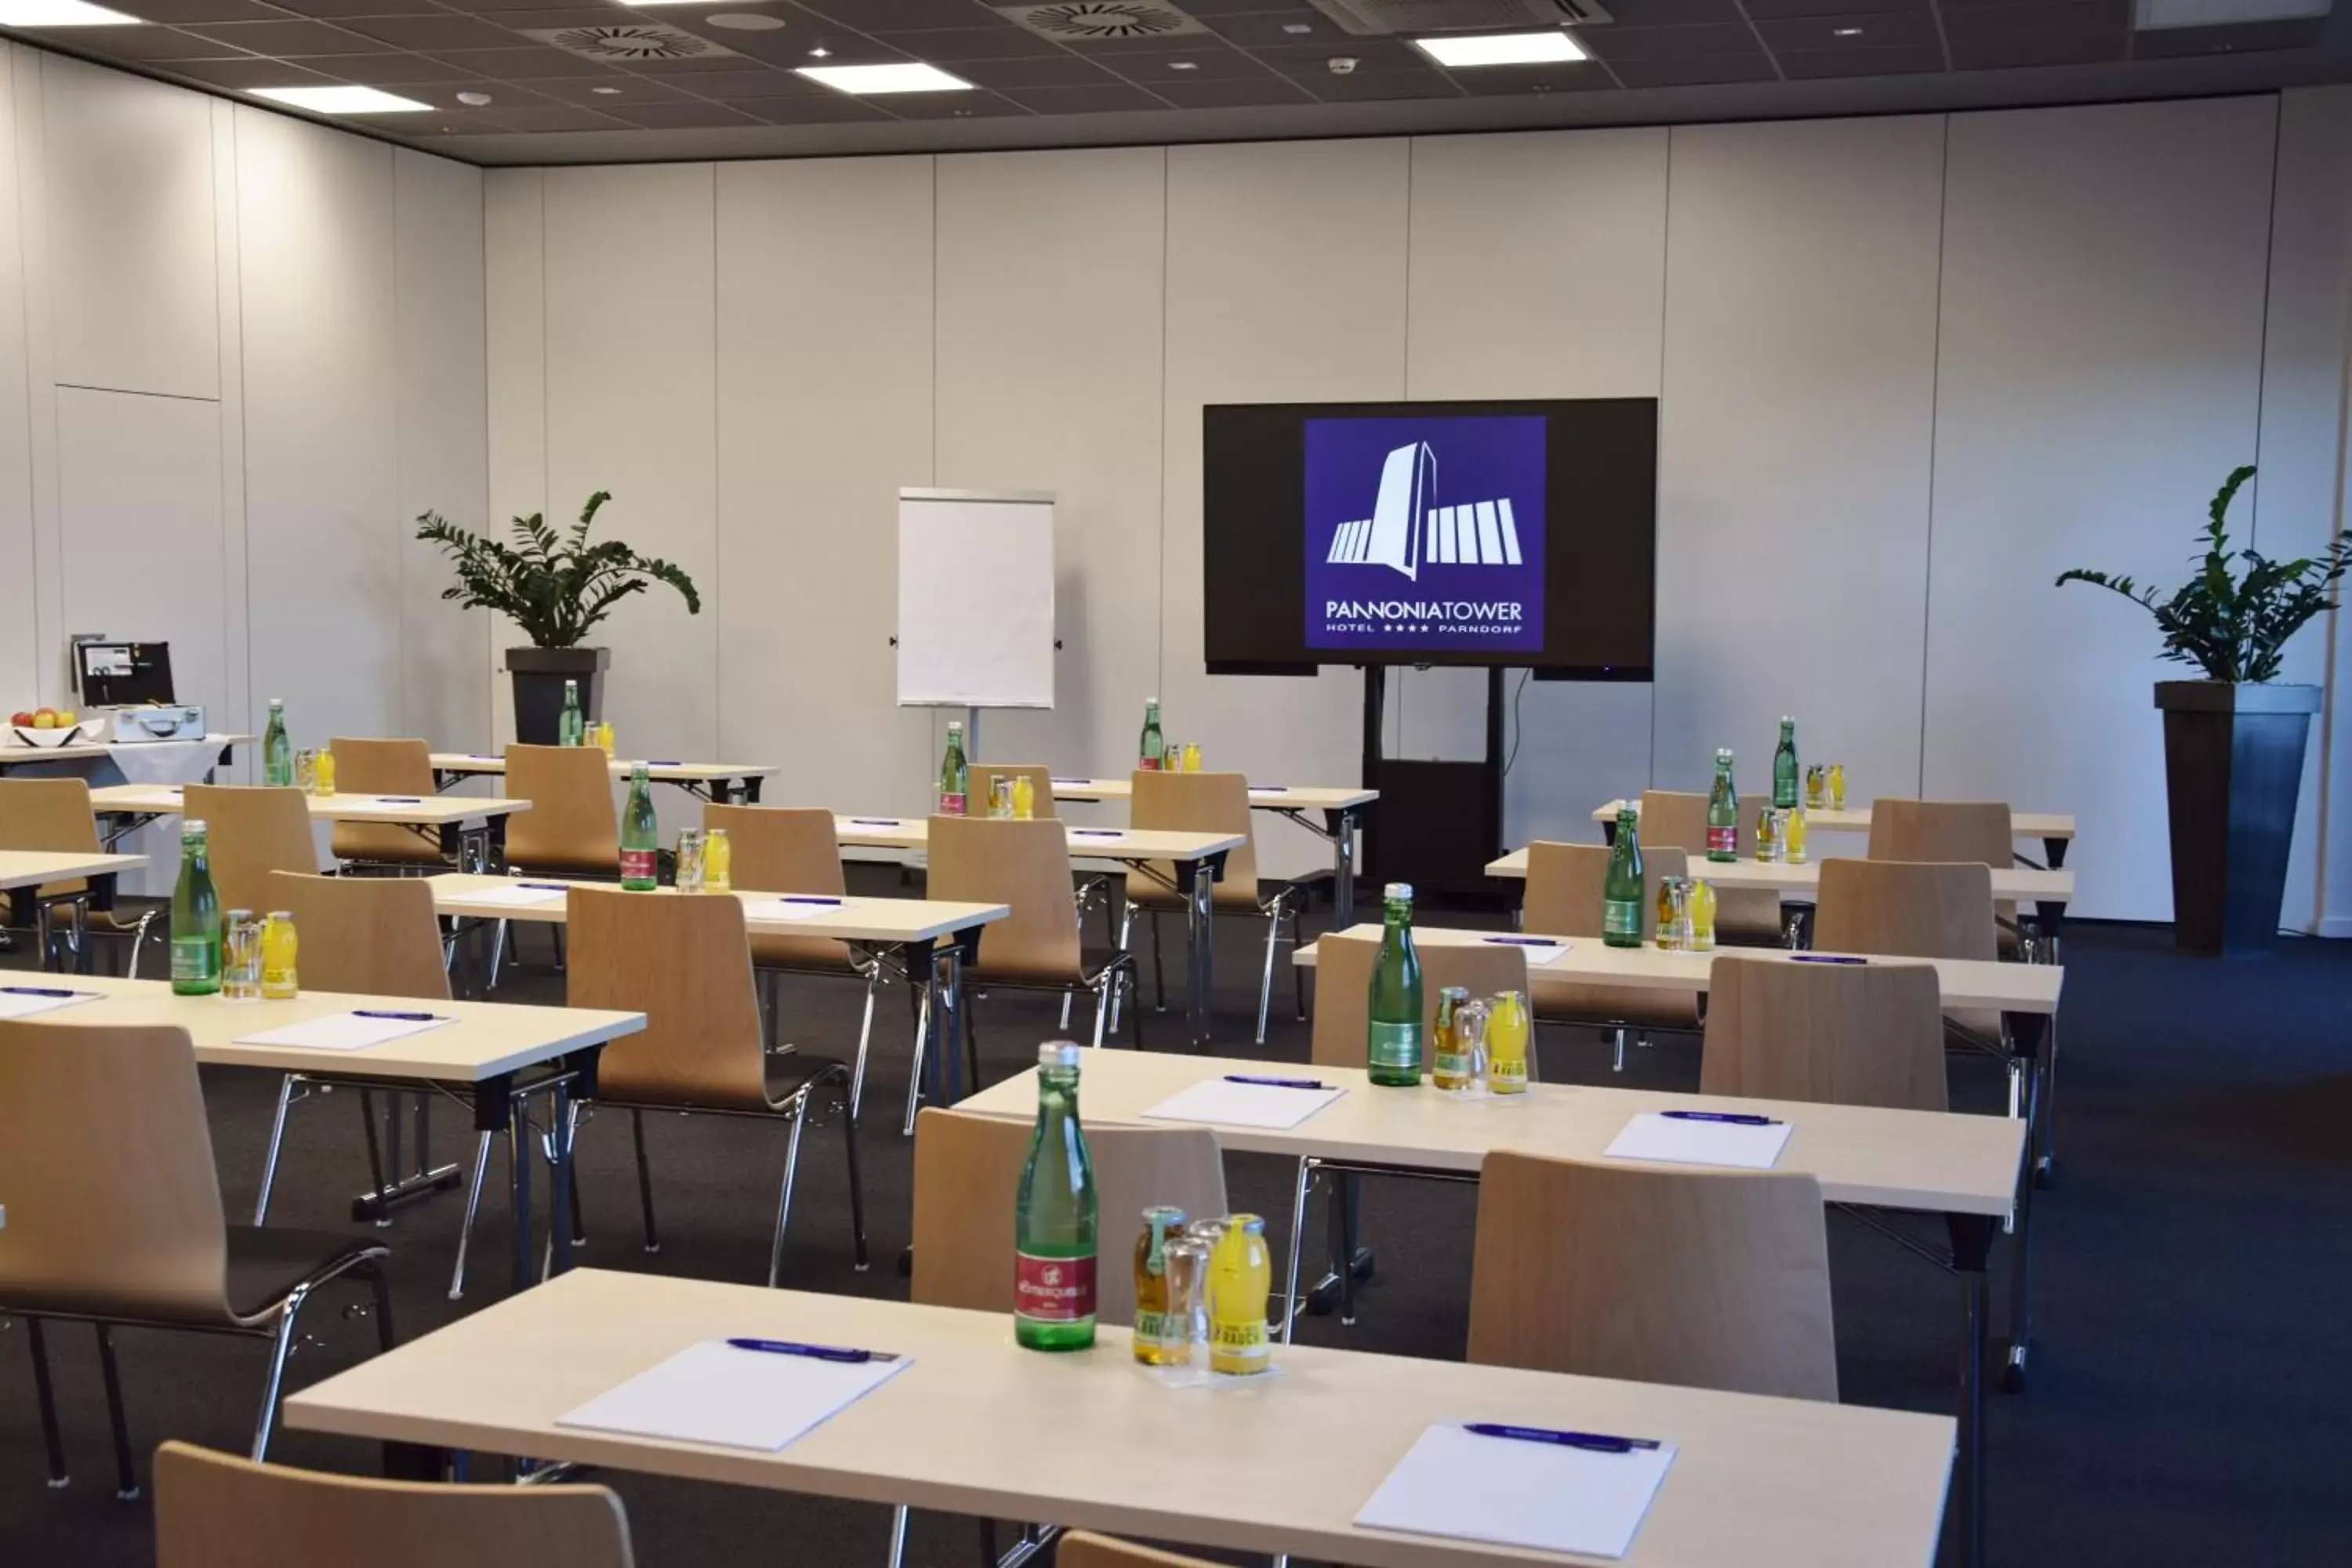 Meeting/conference room in Pannonia Tower